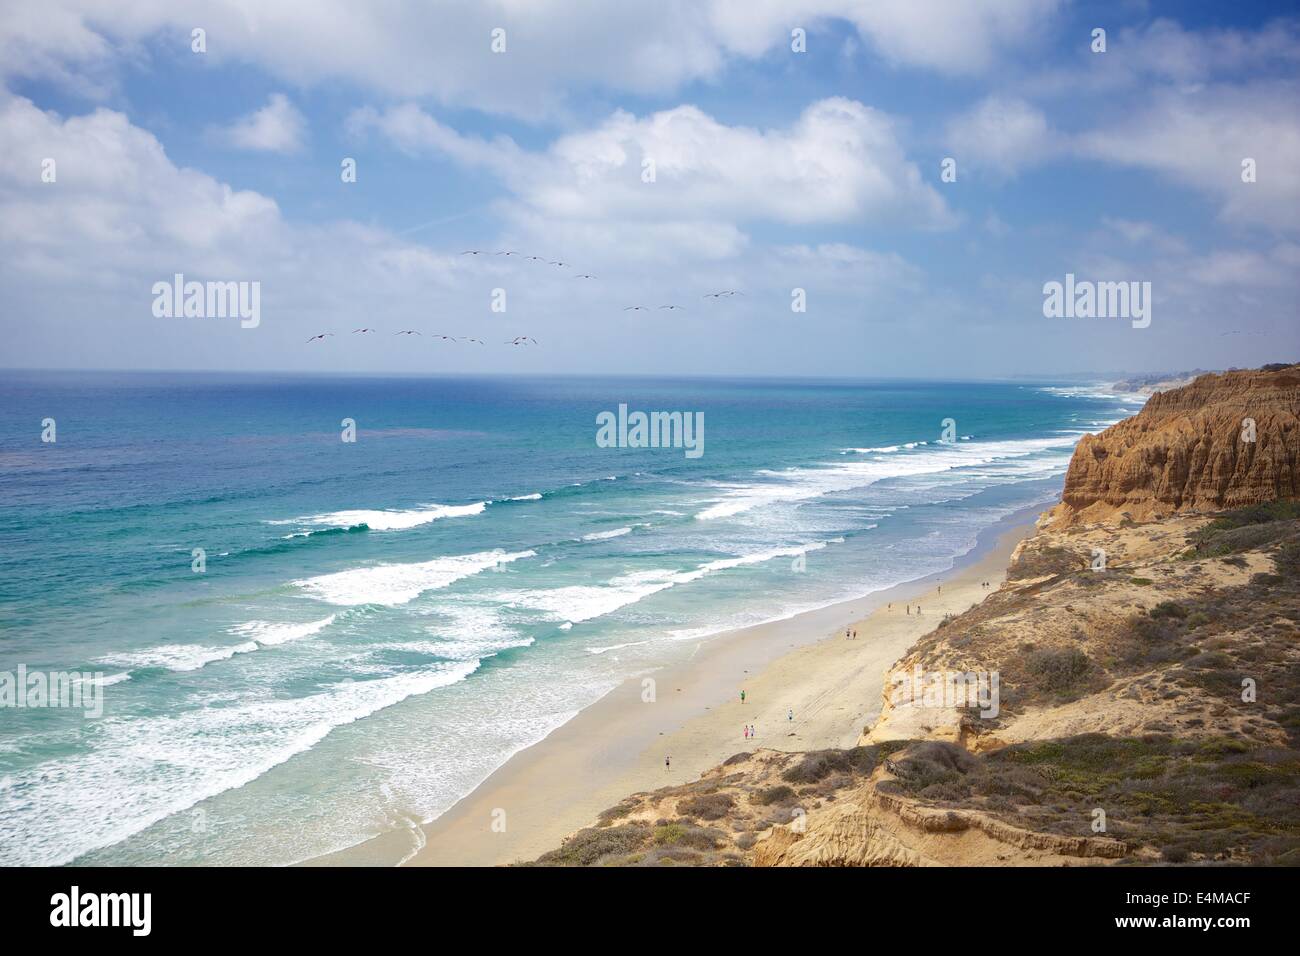 Aerial view from a paraglider over the beach at Torrey Pines State Reserve in La Jolla, California Stock Photo